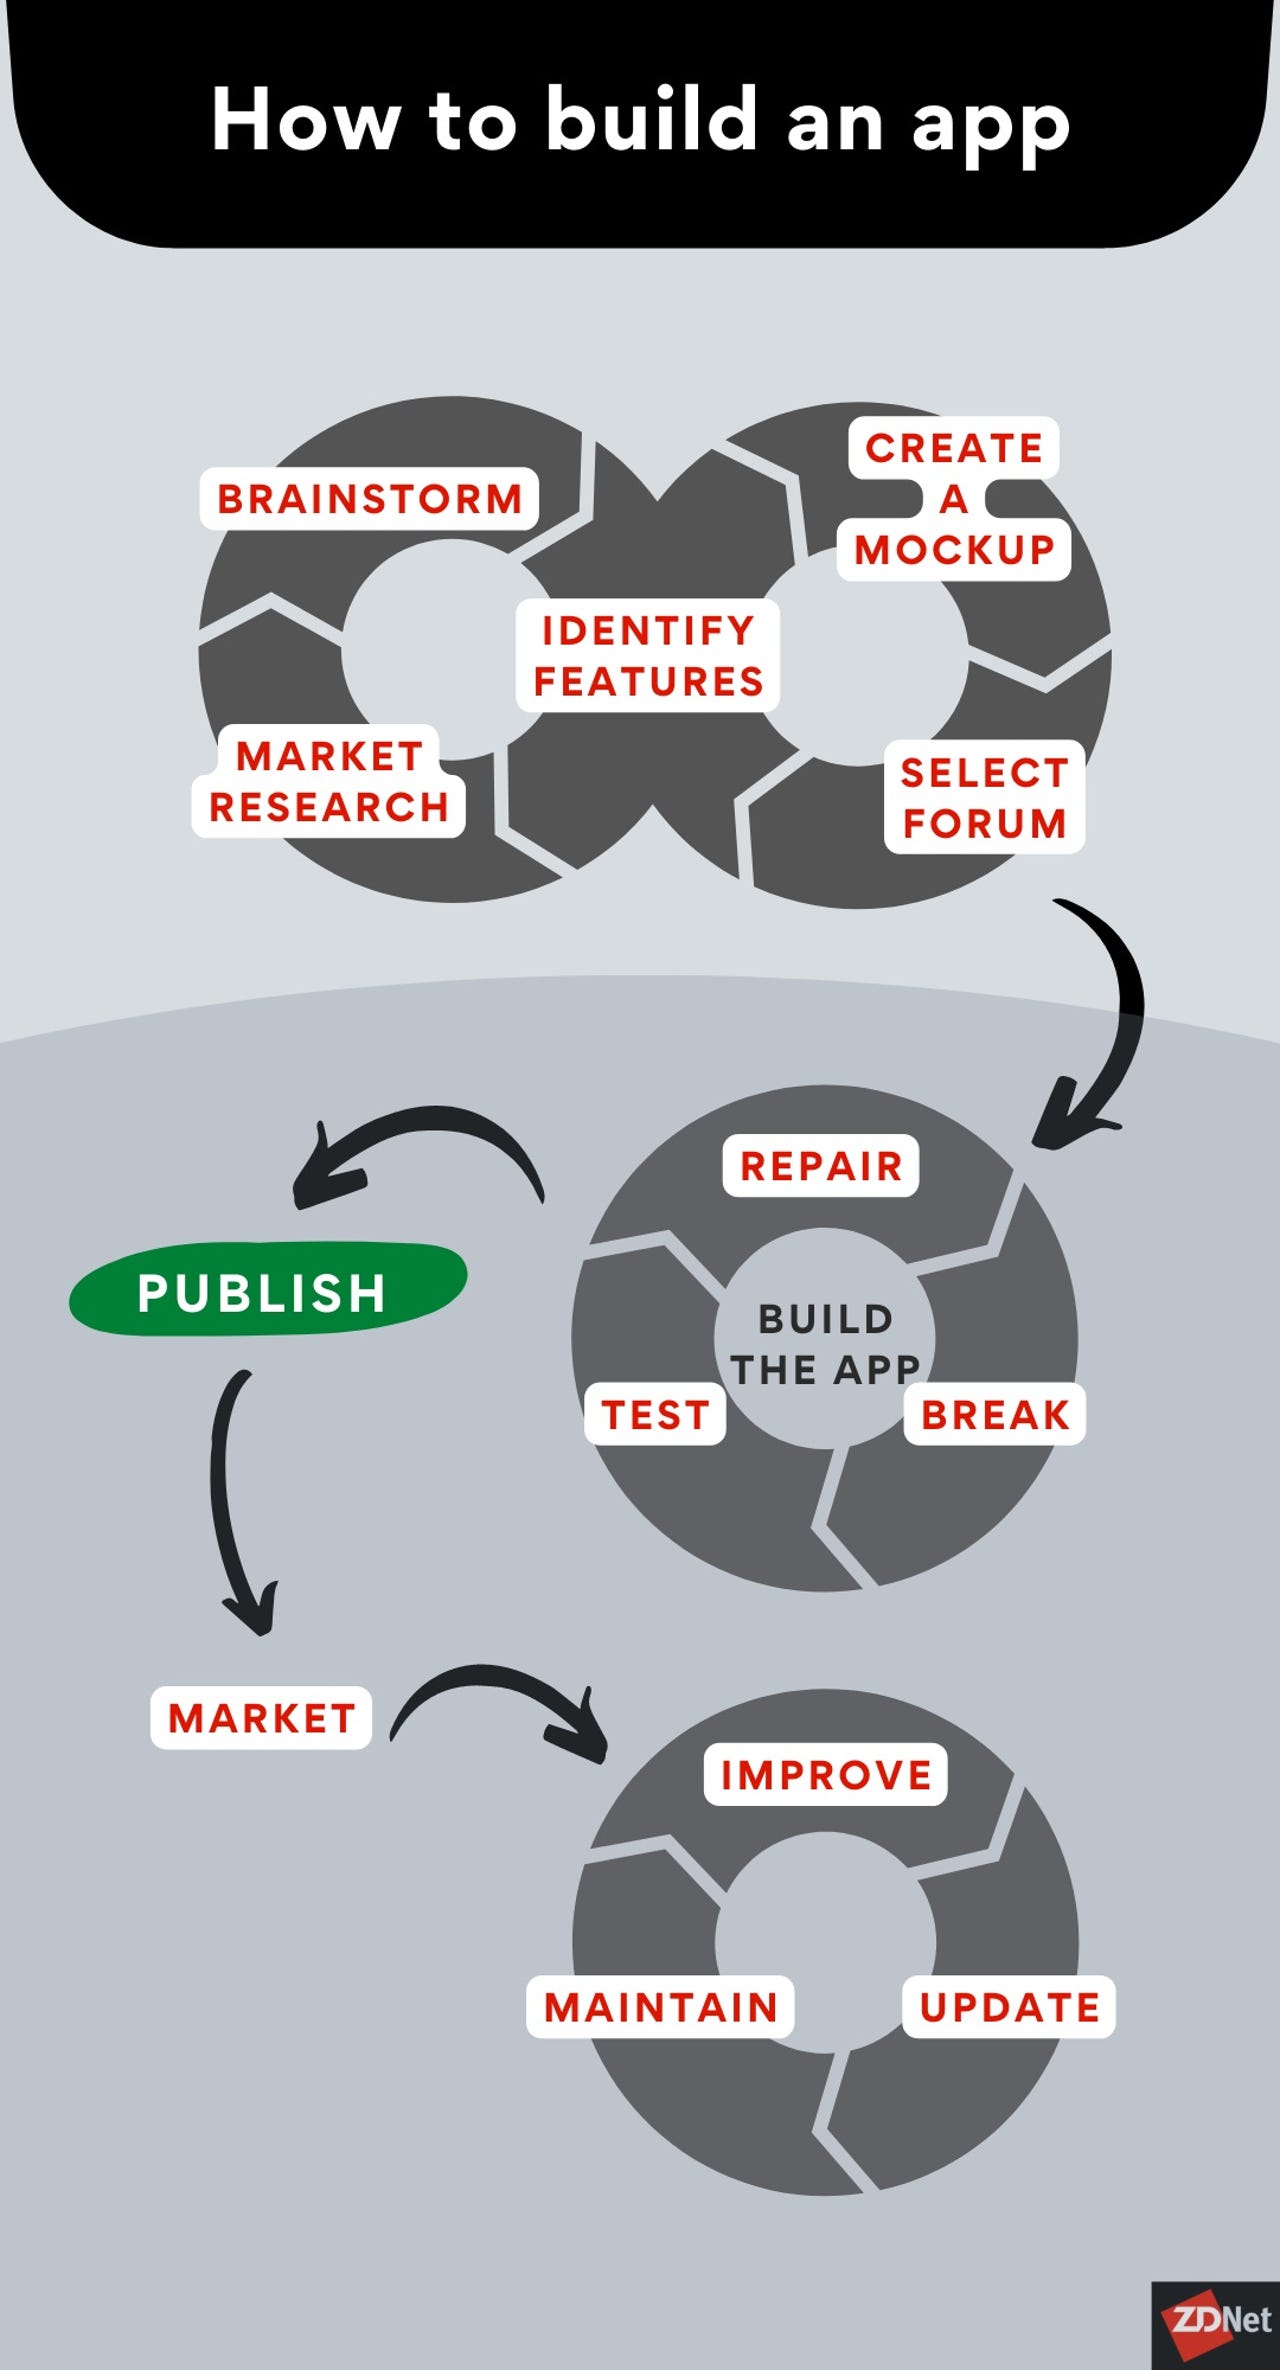 A flow chart summarizing the app development process. Begin with brainstorming, identifying features, creating a mockup, selecting a platform, and conducting market research. Then build the app, testing, and repairing it when it breaks. Market and publish it. Once the app is live, improve, maintain, and update it regularly.